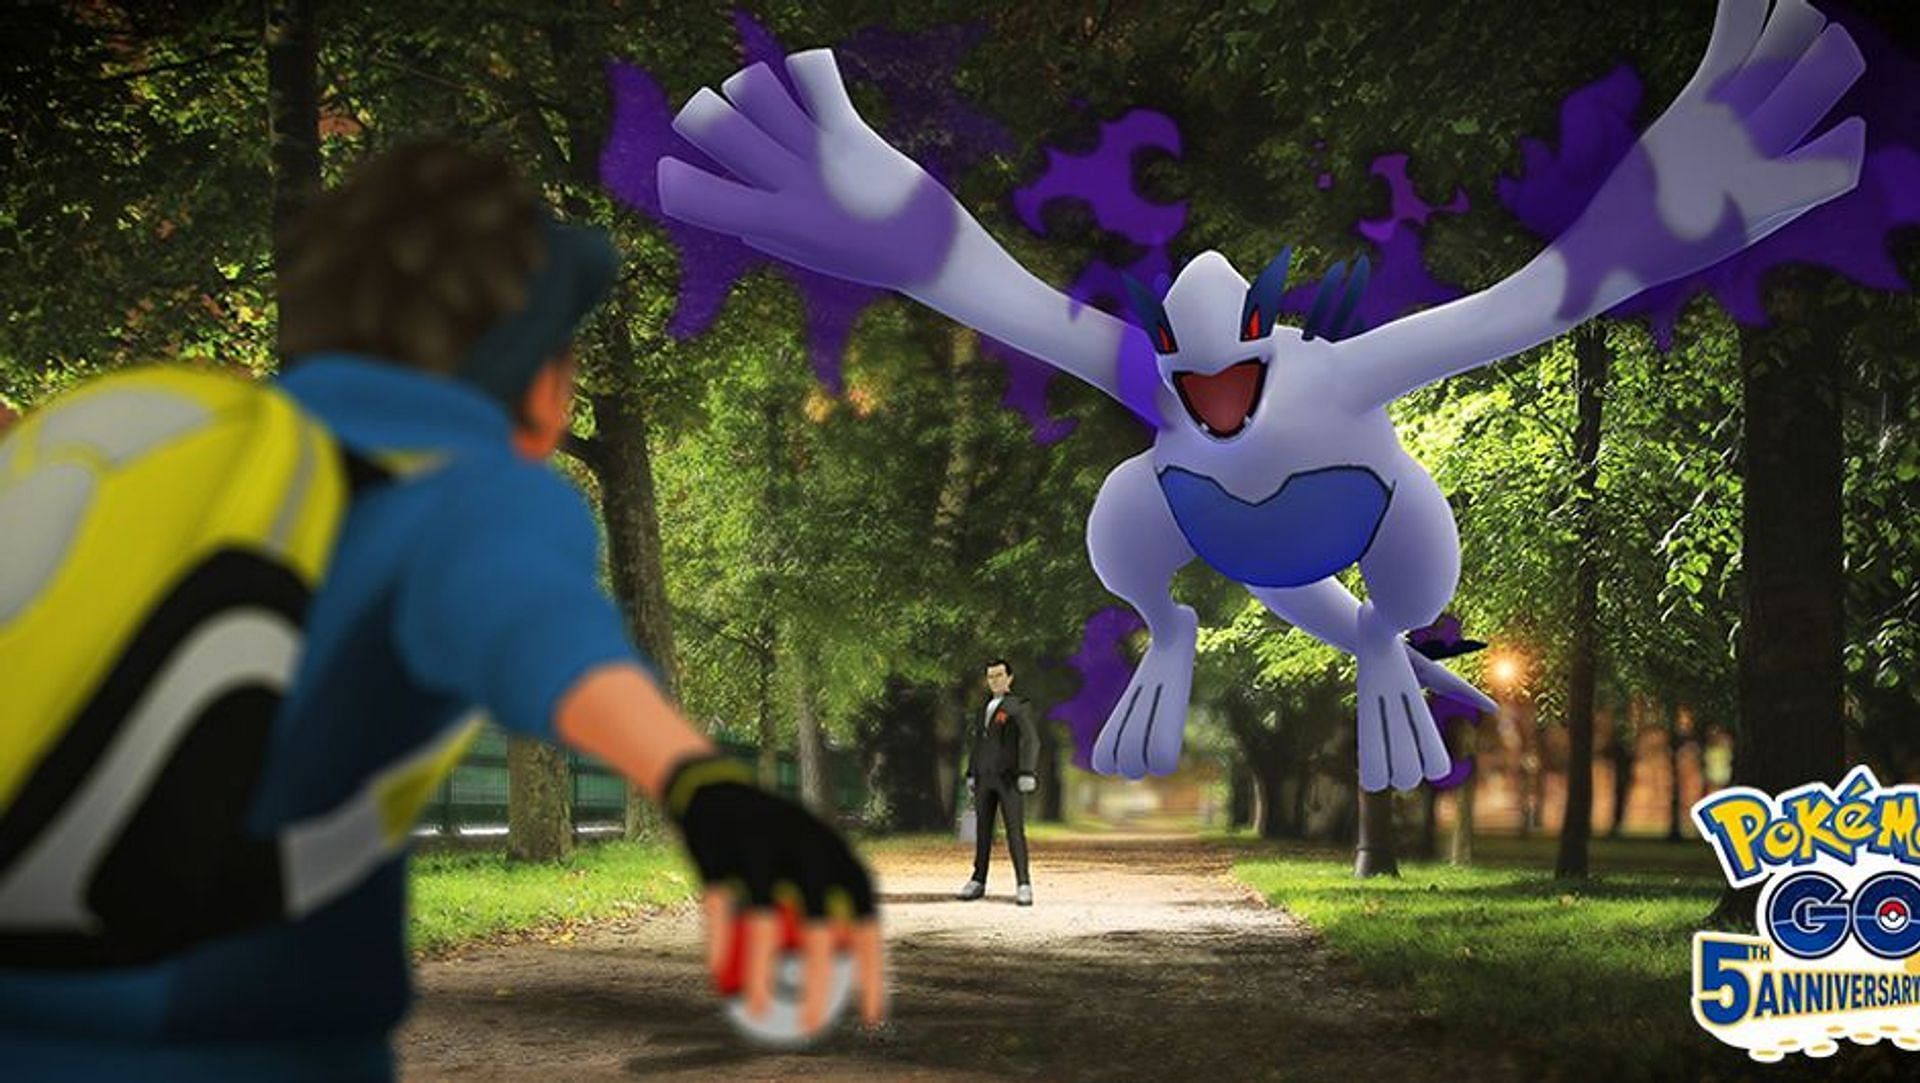 Giovanni could be battled during the Diwali event. After defeating him, players were rewarded with the chance to catch a shadow Lugia (Image via Niantic)